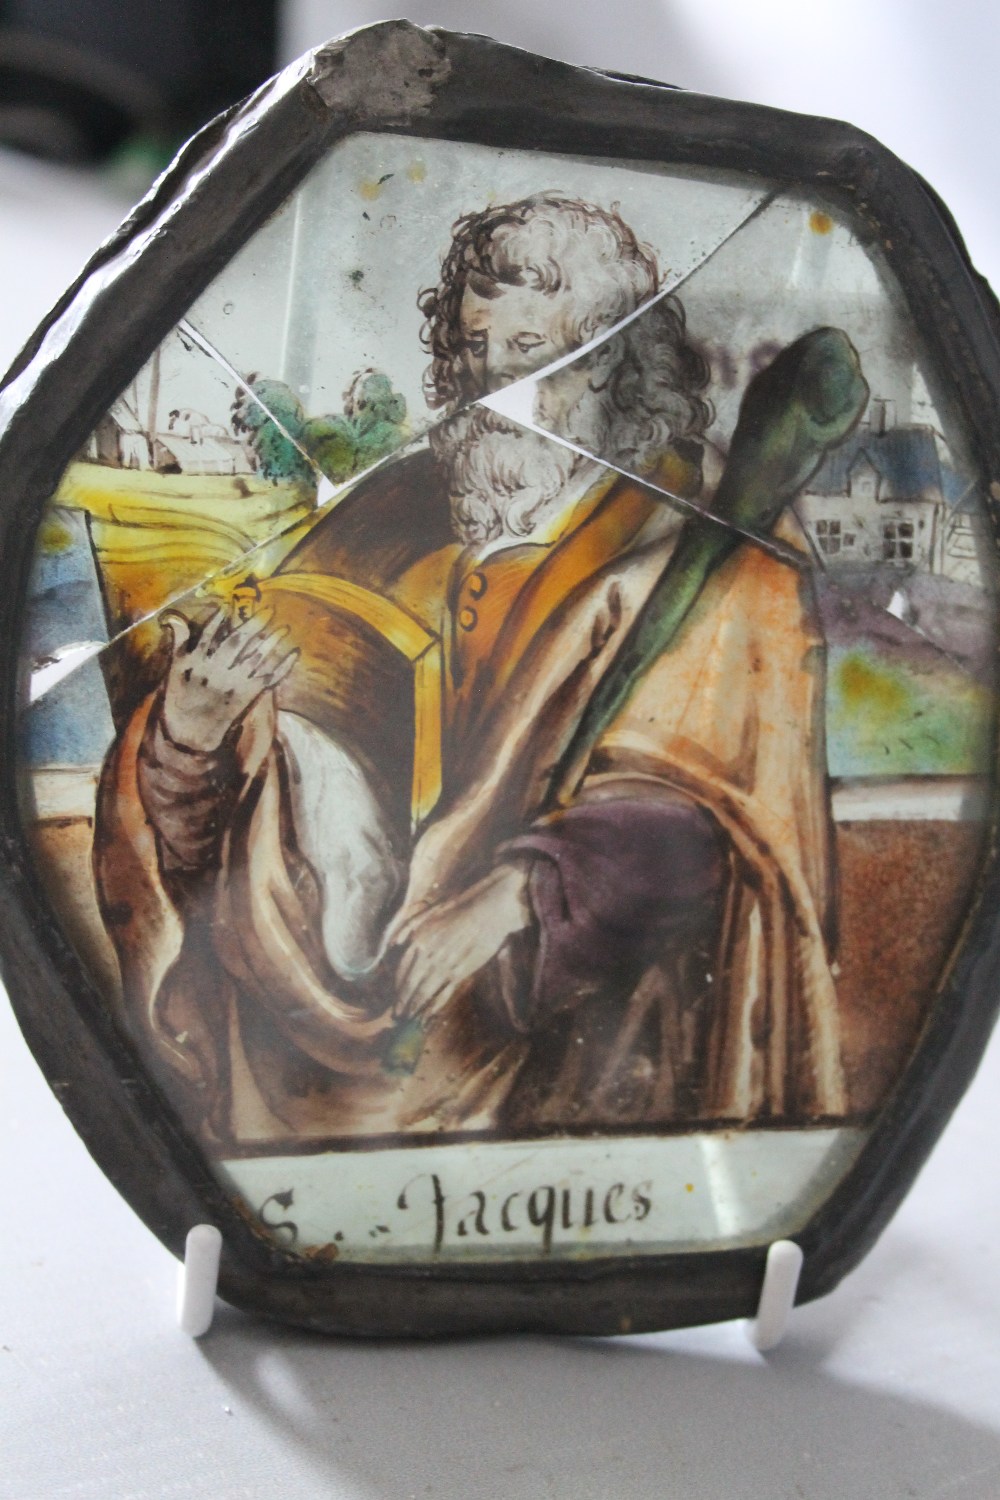 TWO UNUSUAL ANTIQUE STAINED GLASS PANELS DEPICTING 'ST. JACQUES' AND ANOTHER RELIGIOUS FIGURE, - Image 3 of 4